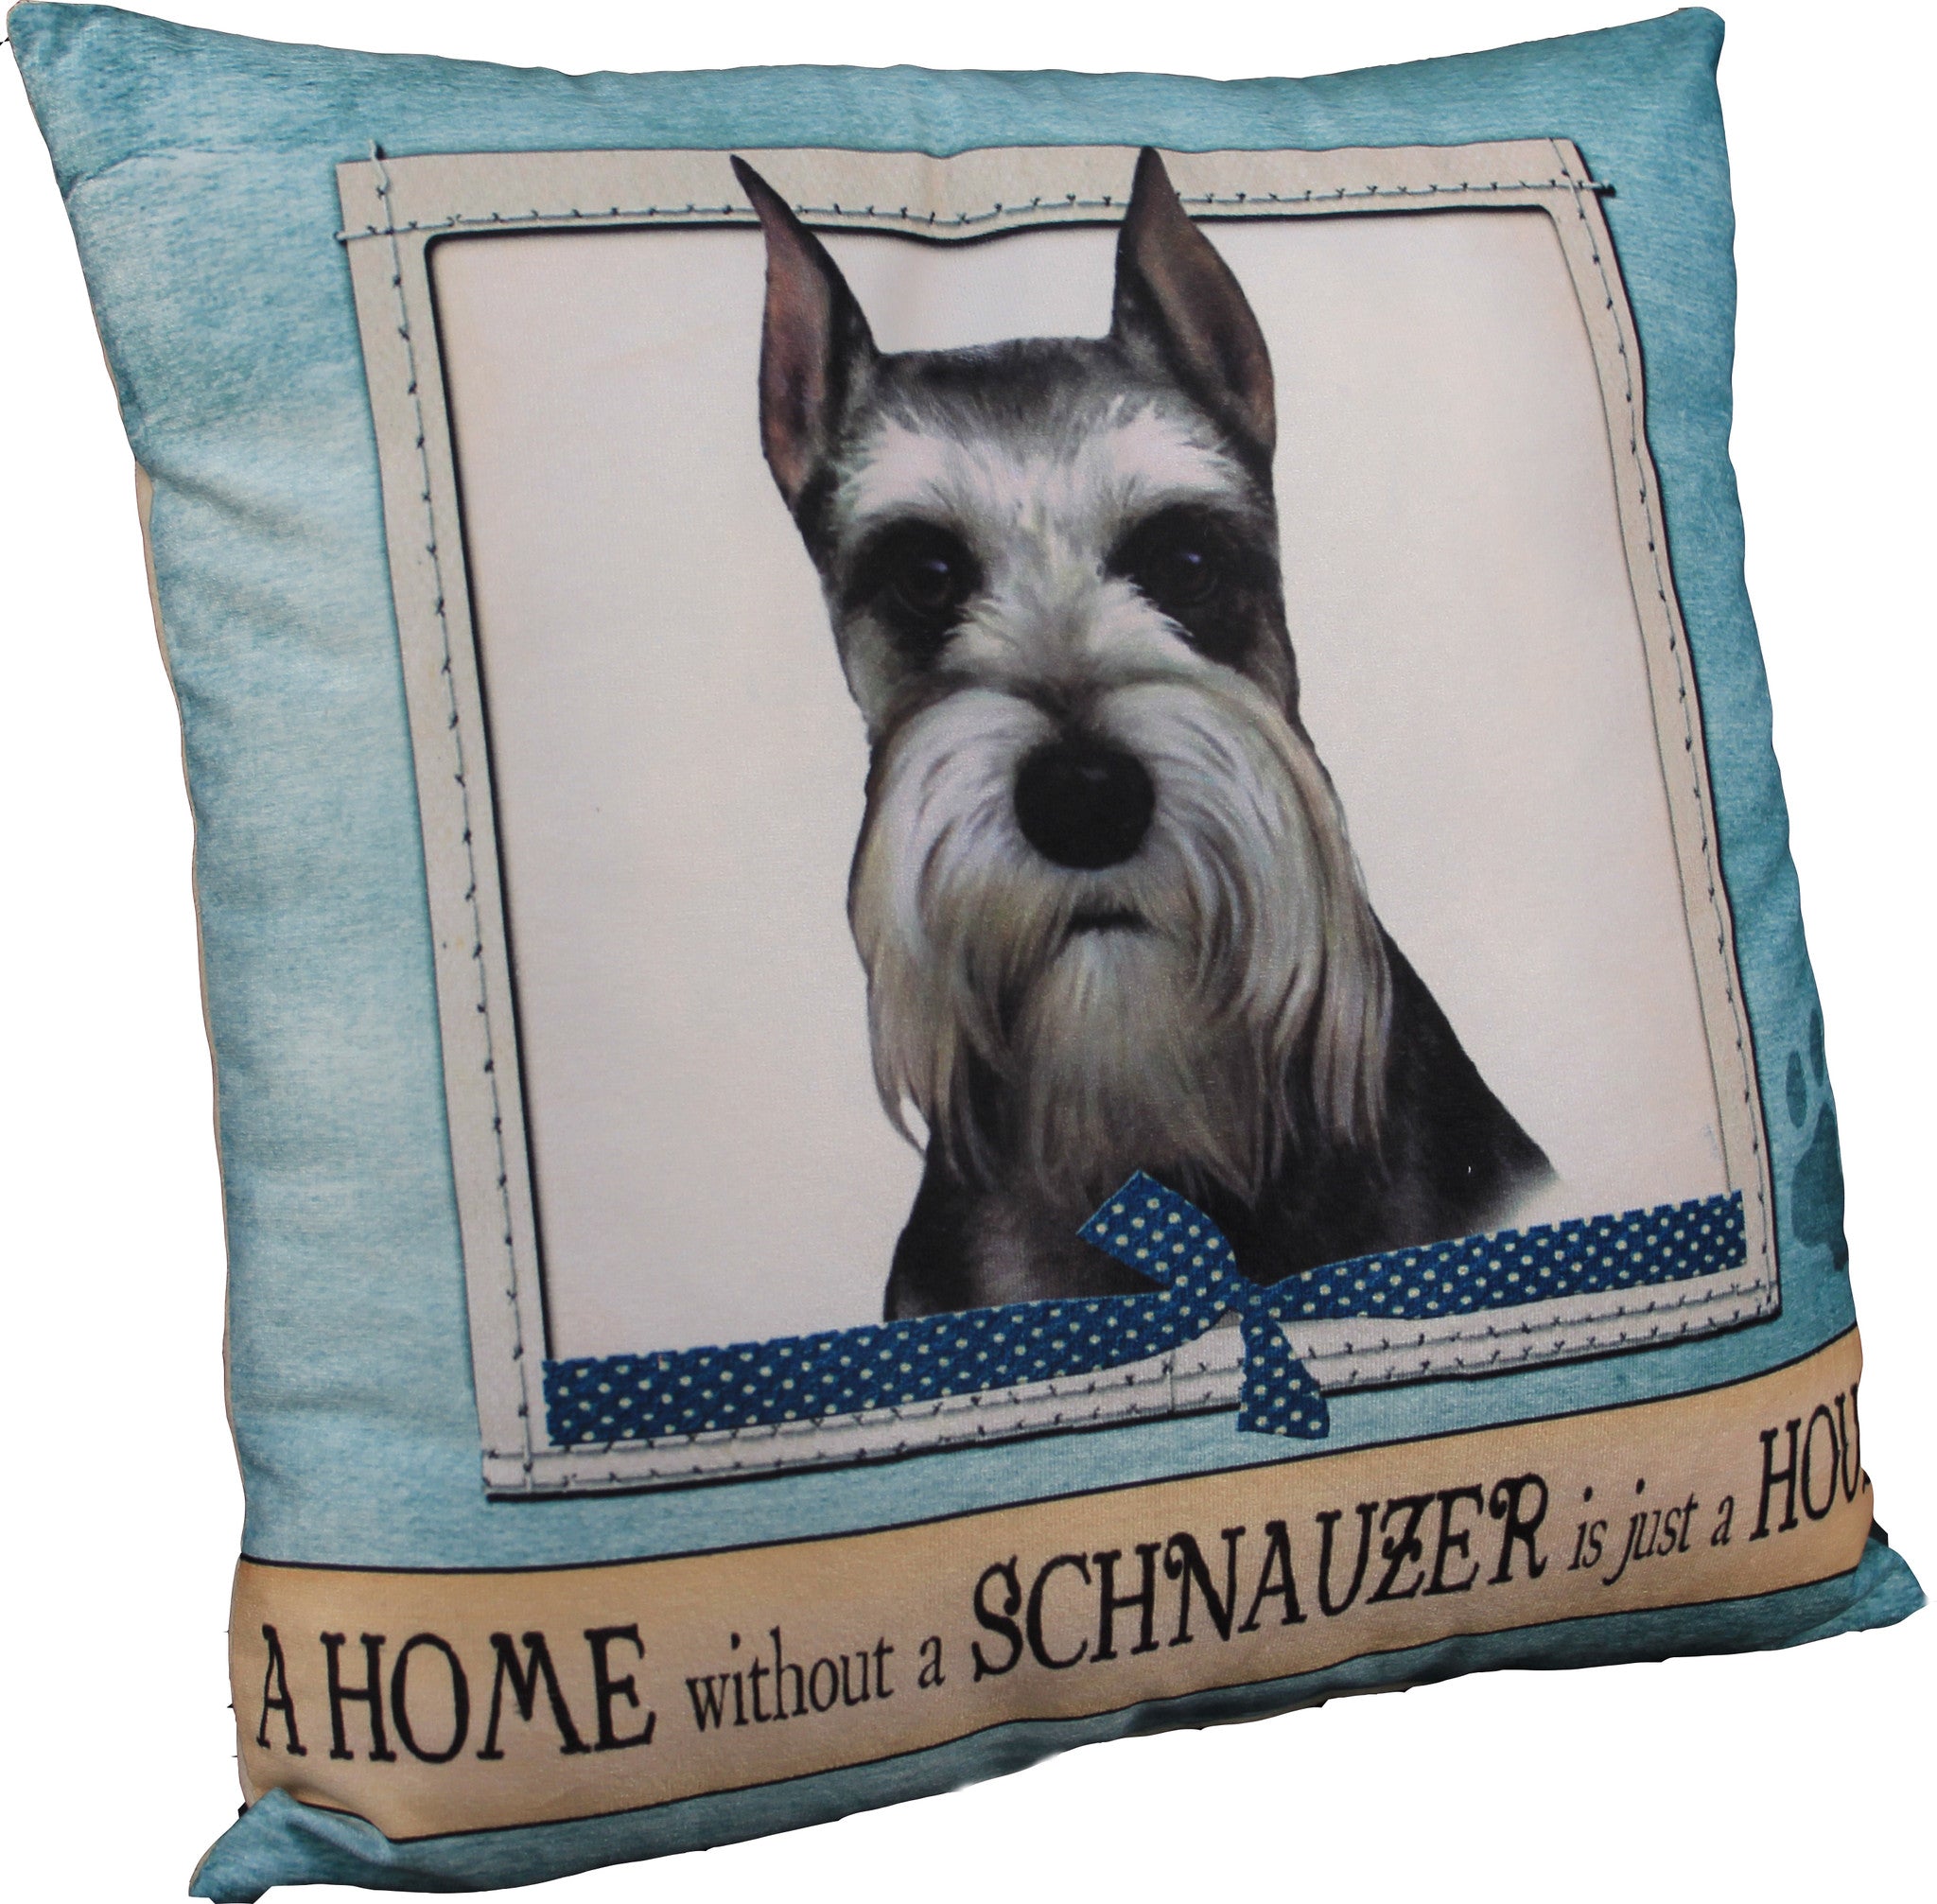 Measures approx 16" x 16" Outside is 100% Polyester Inside stuffed with 100% Polyester Make your sofa a friendlier place with this lovable dog throw pillow which is available for a wide range of breeds. Each of these decorative pillows features a large picture of a particular breed of dog, along with the message "A HOME without a 'dog breed' is just a HOUSE".